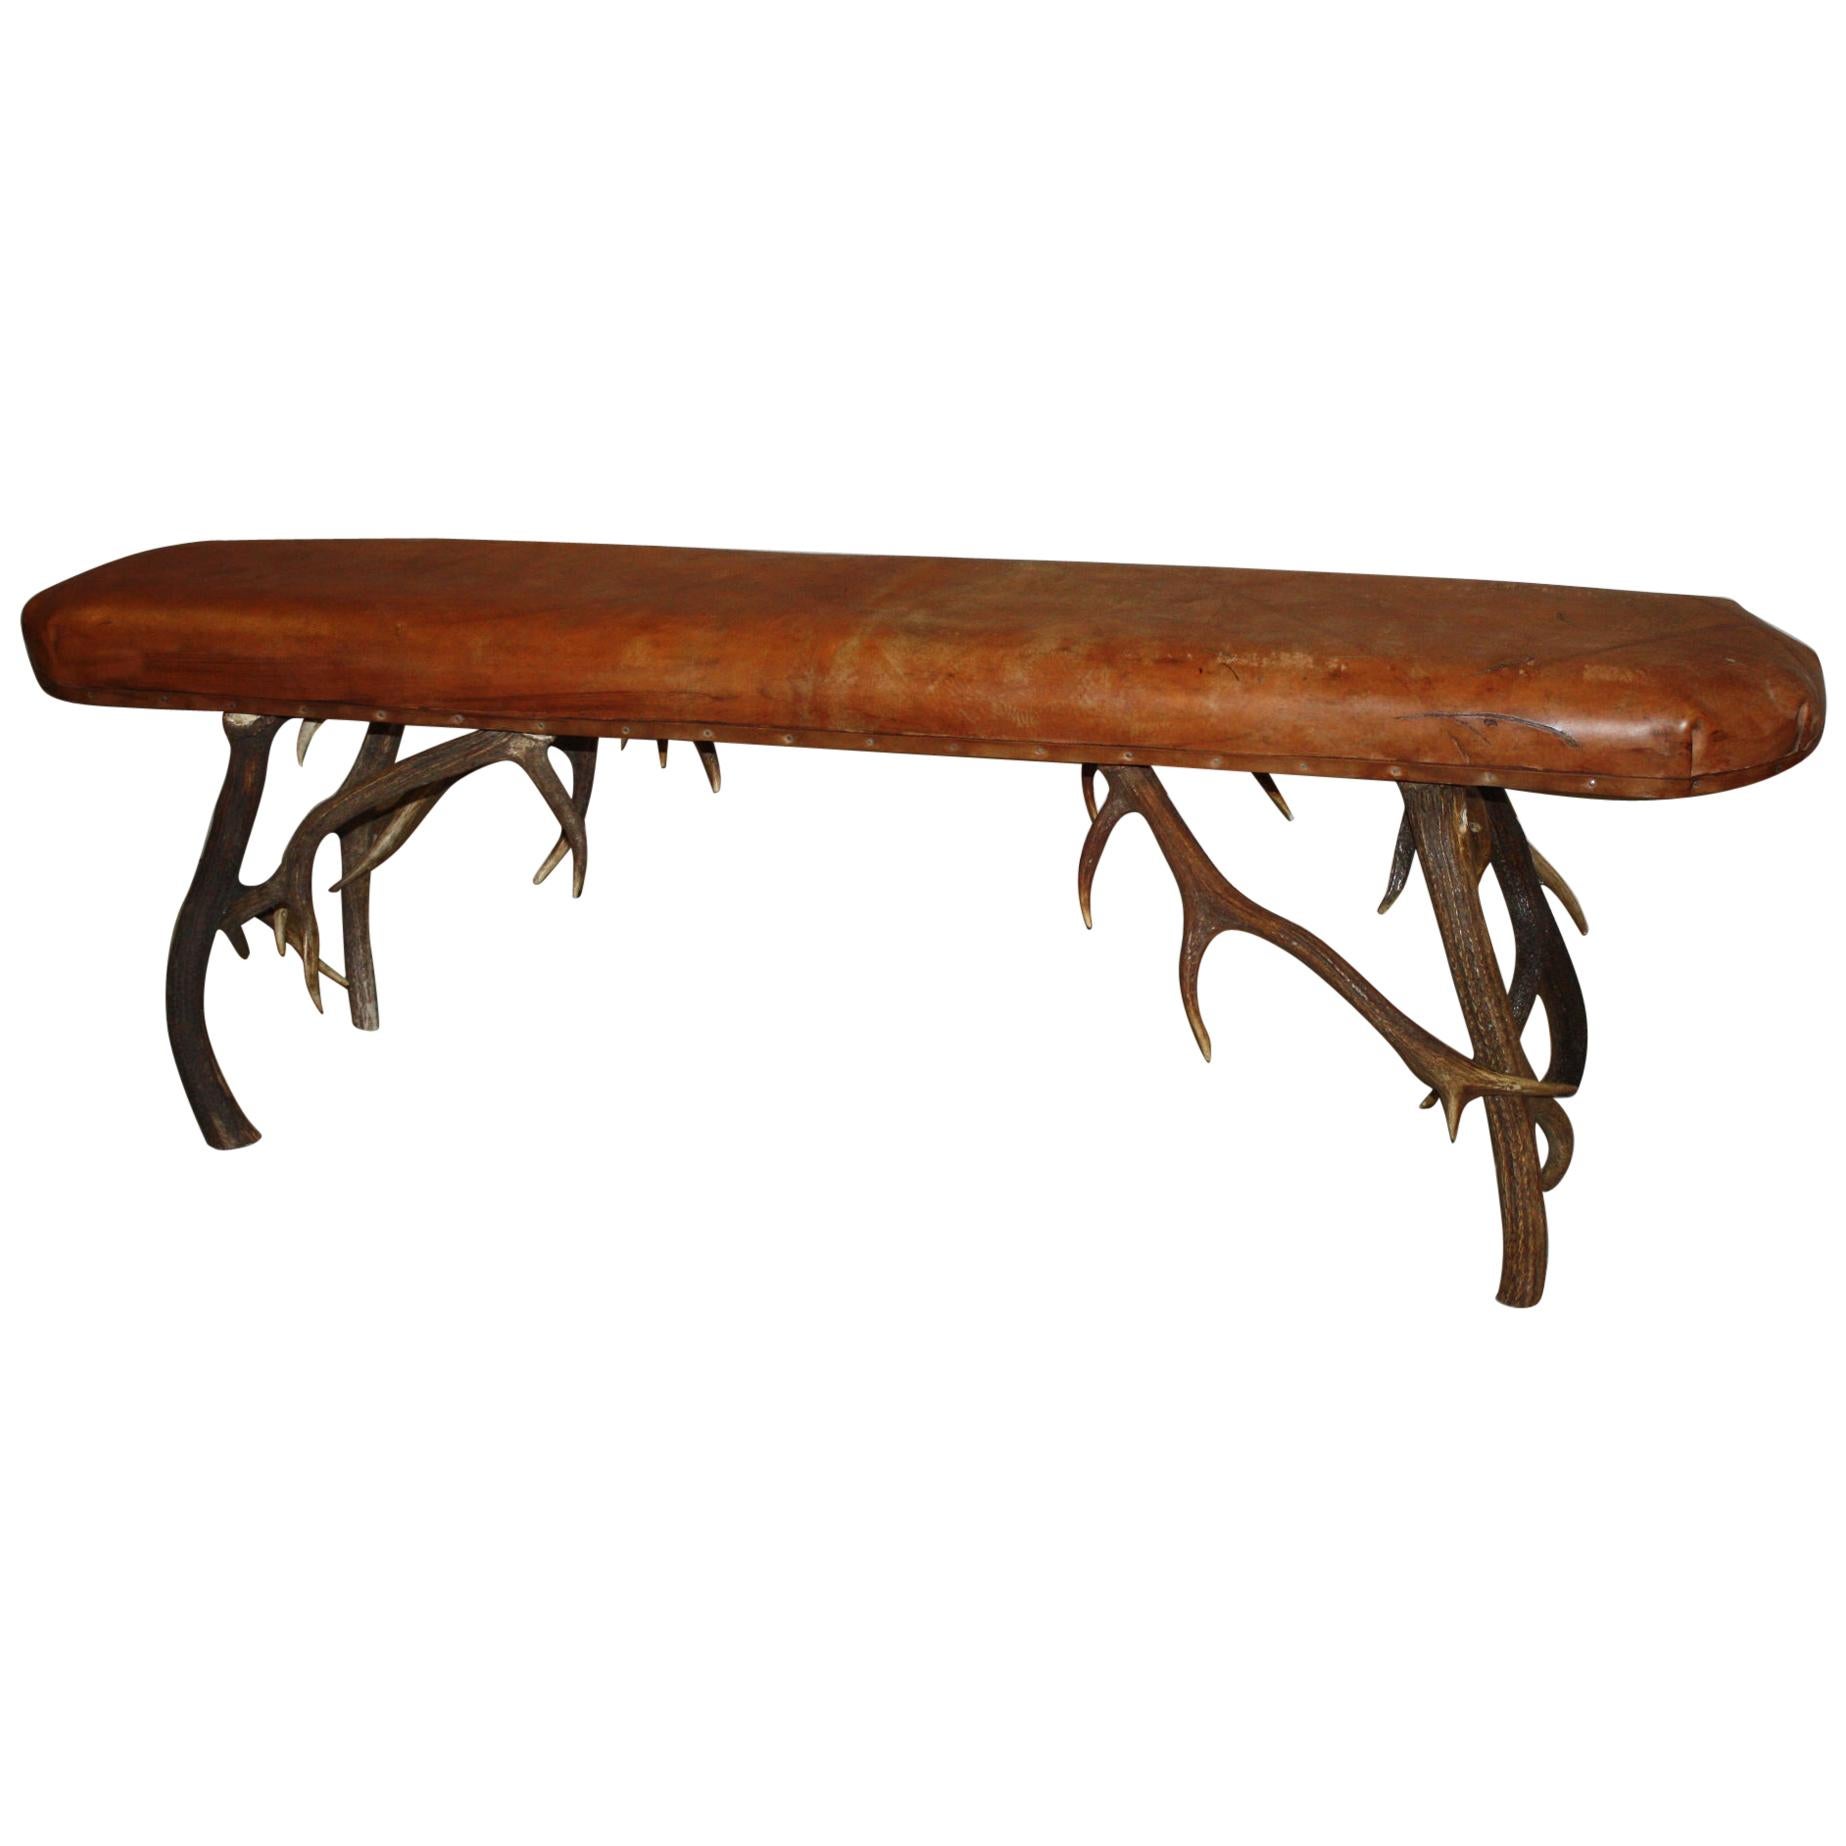 Leather Top Stag Horn Bench For Sale